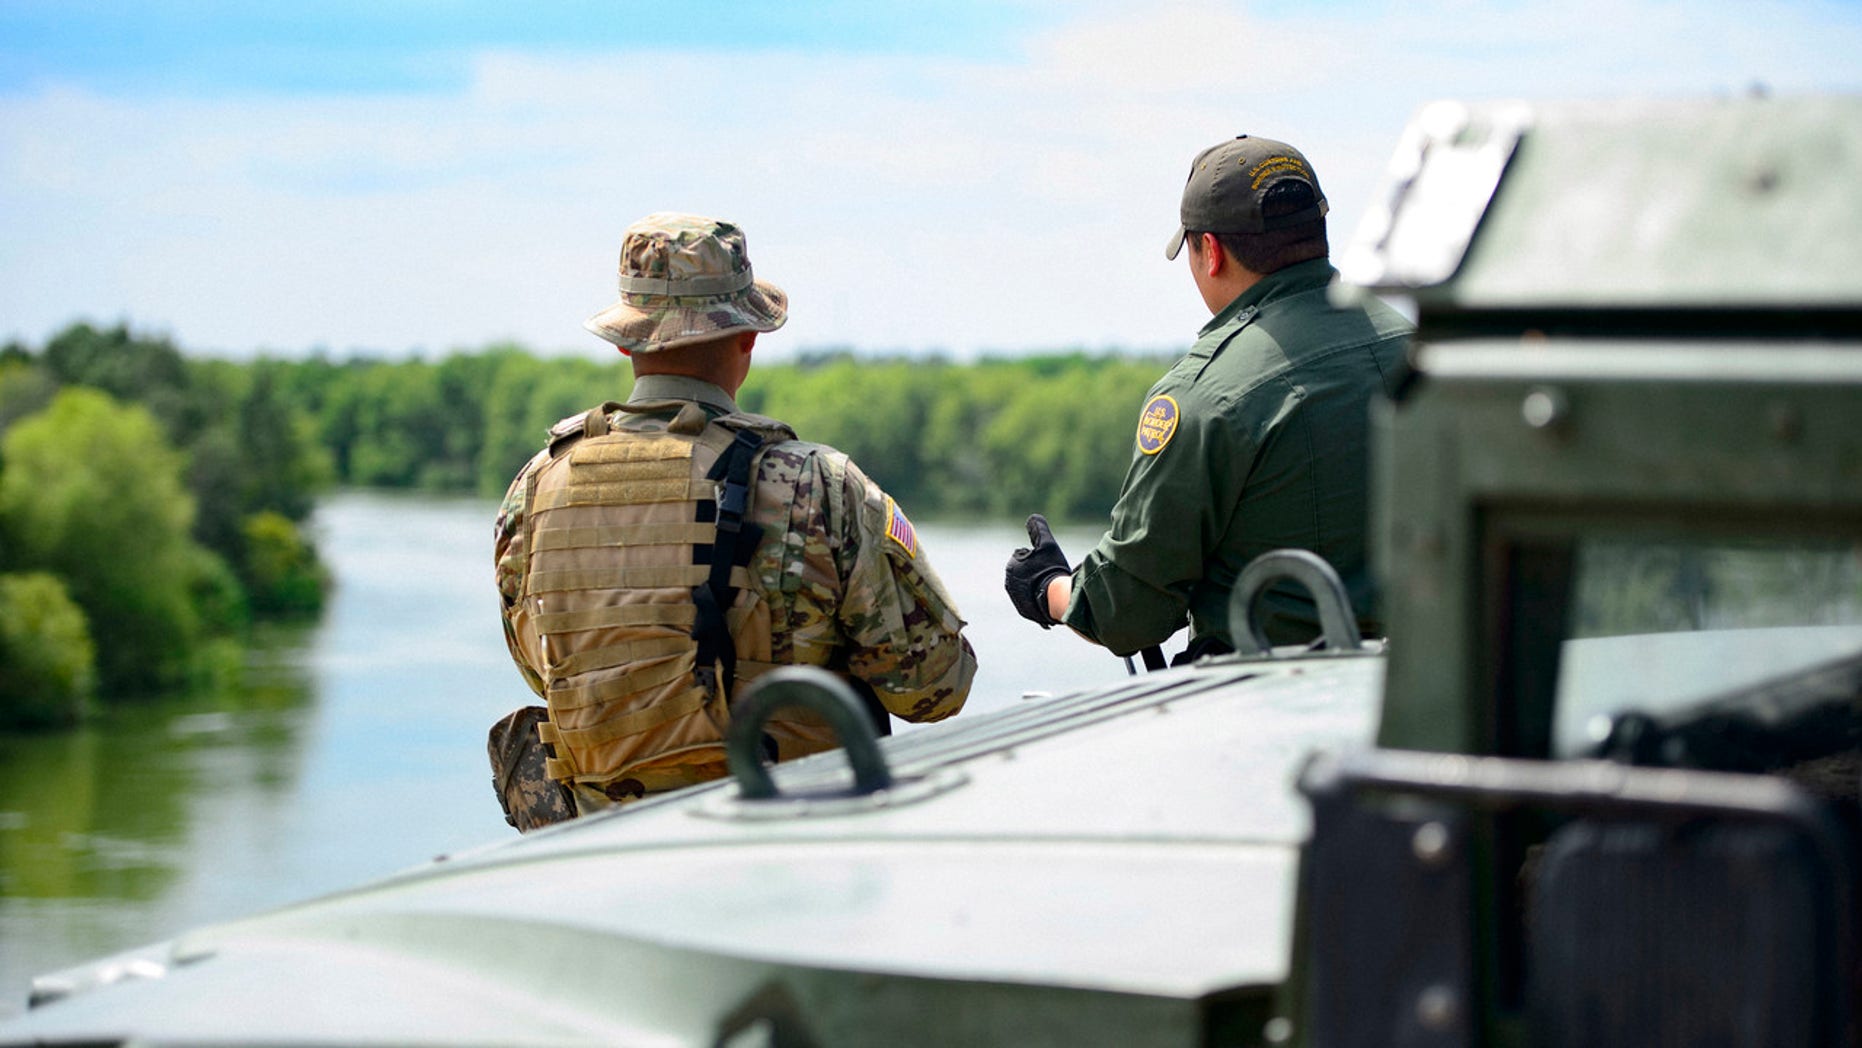   FILE: A Texas guard and a customs officer and Border Patrol in Texas. Border Patrol 